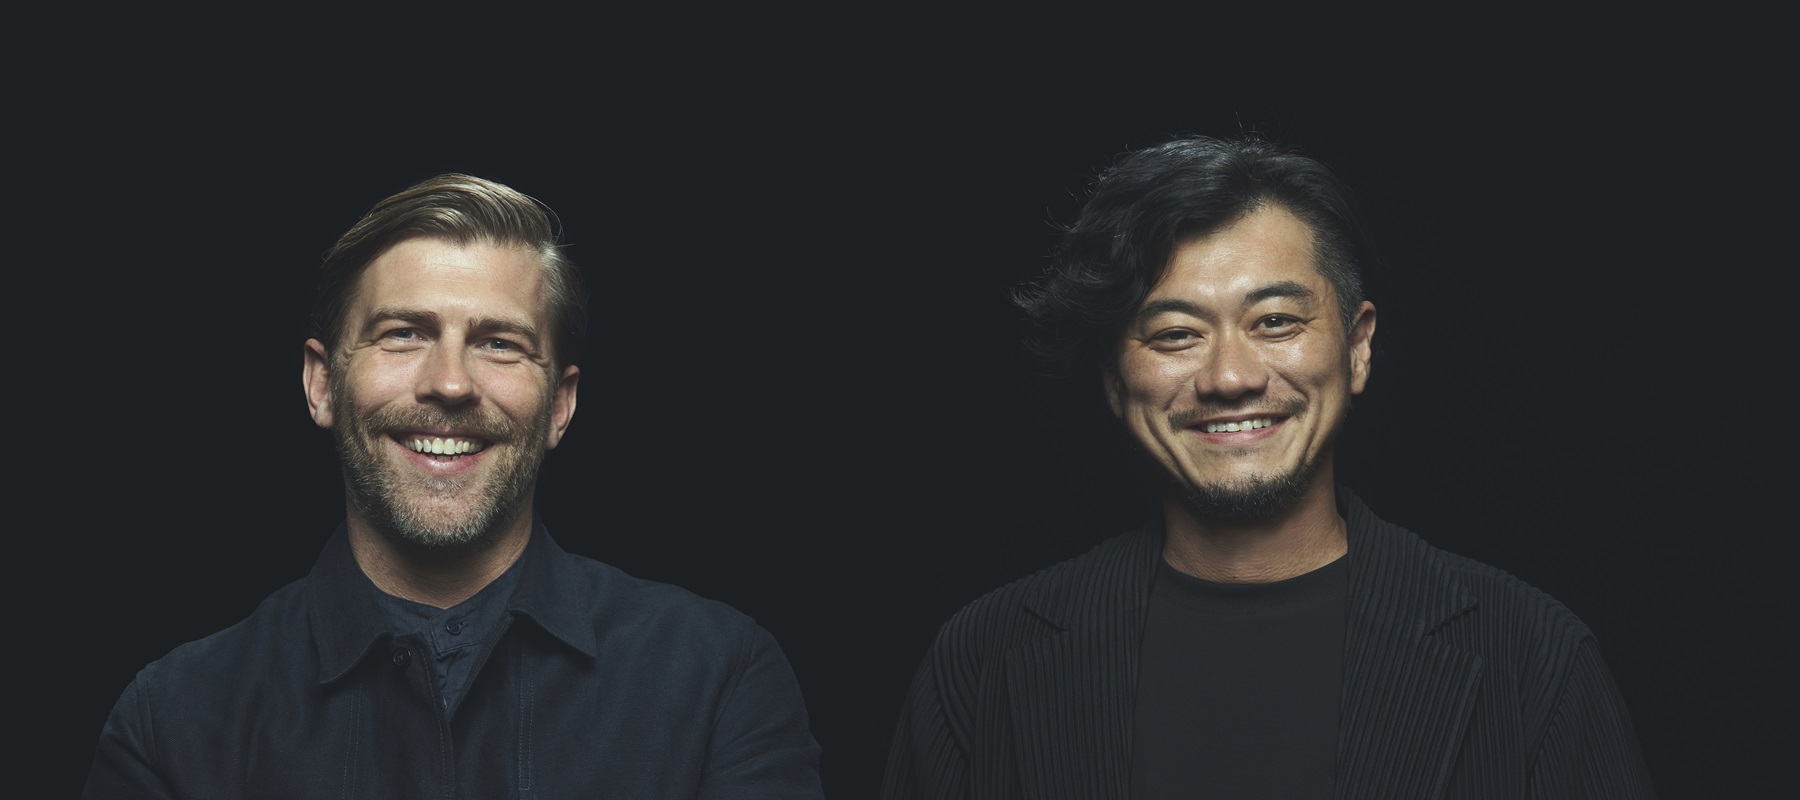 Dentsu announces global expansion of innovation lab